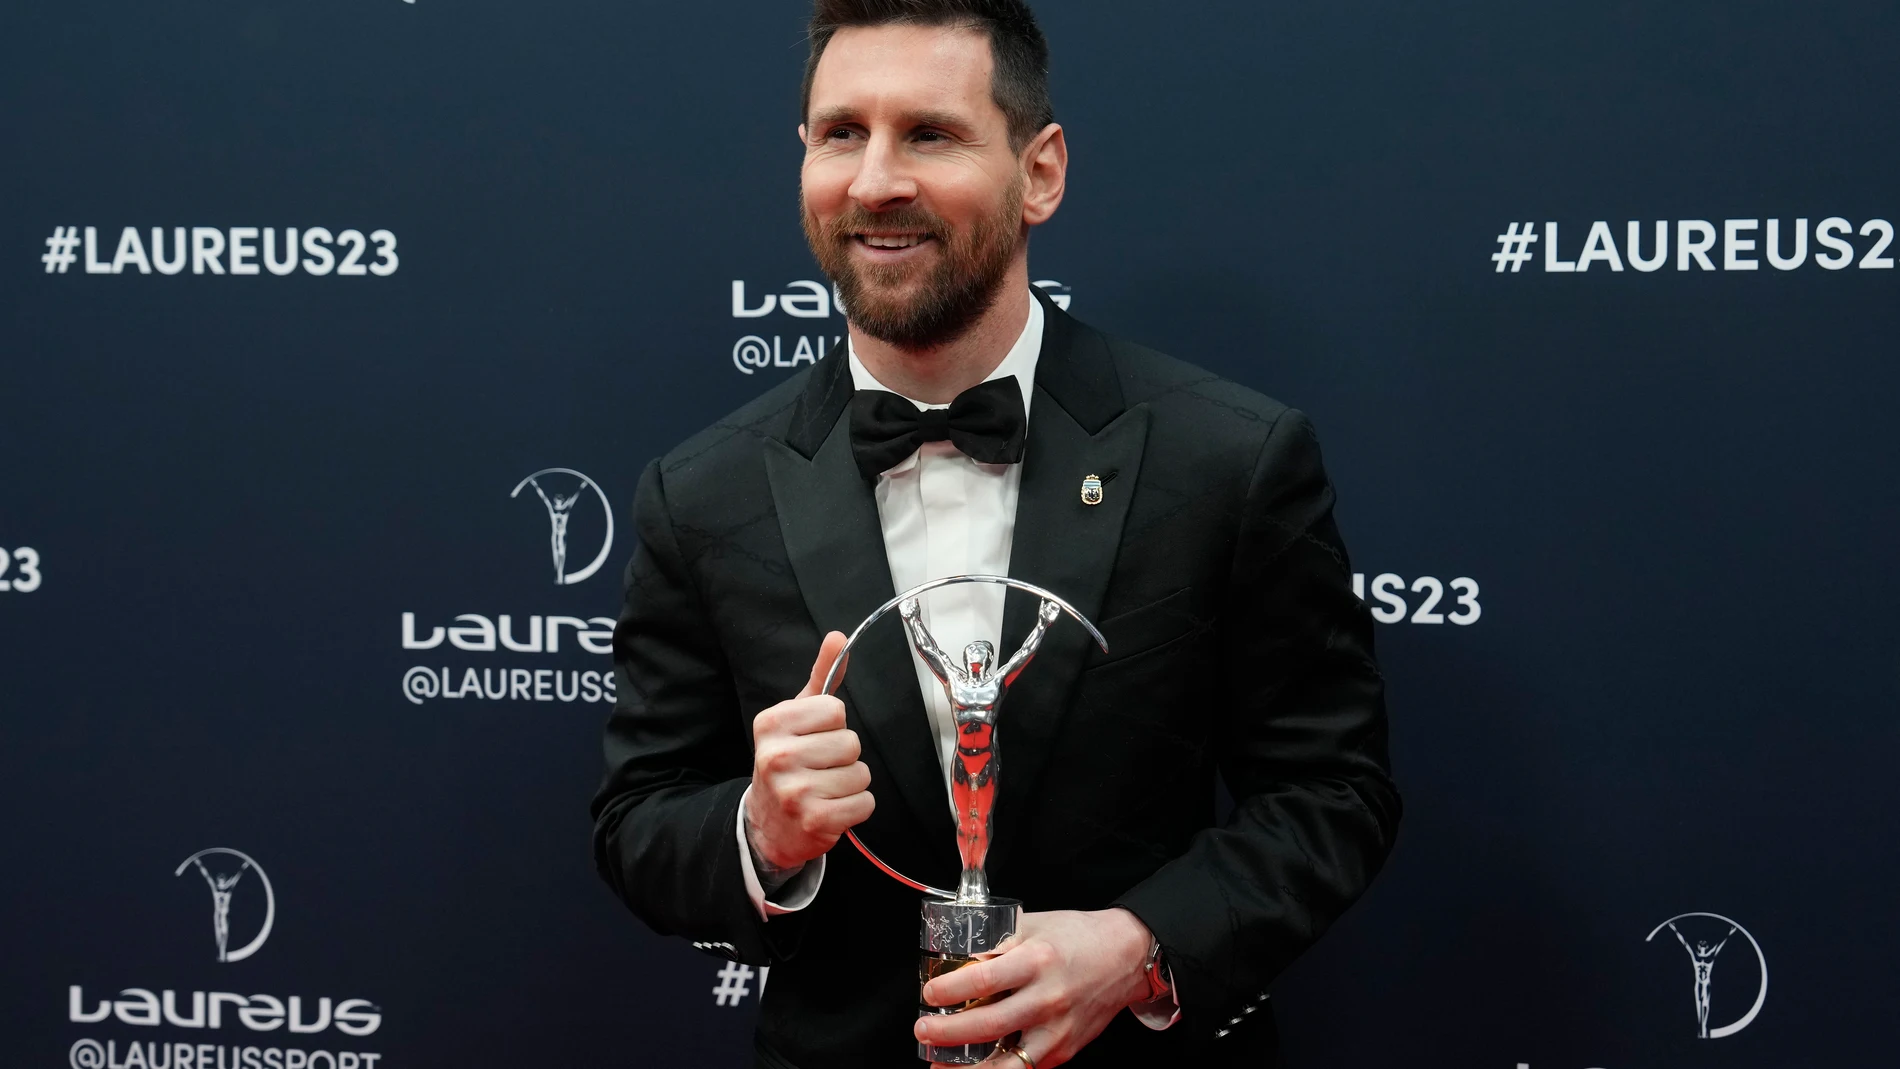 Argentine soccer player Lionel Messi poses after he was presented the award for sportsperson of the year at the Laureus Sports Awards ceremony in Paris, Monday, May 8, 2023. (AP Photo/Lewis Joly)